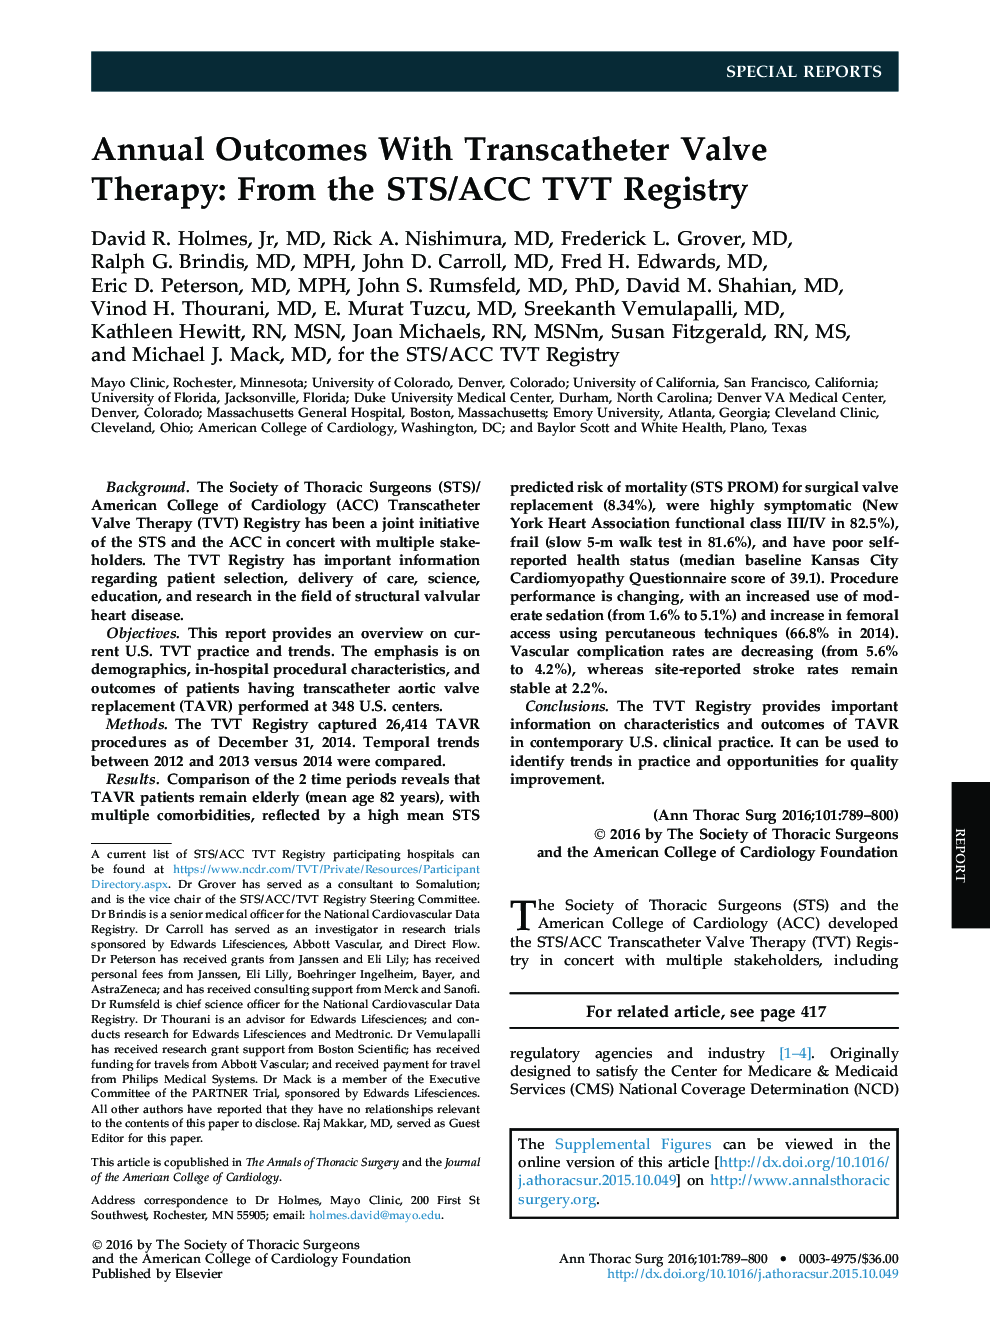 Annual Outcomes With Transcatheter Valve Therapy : From the STS/ACC TVT Registry